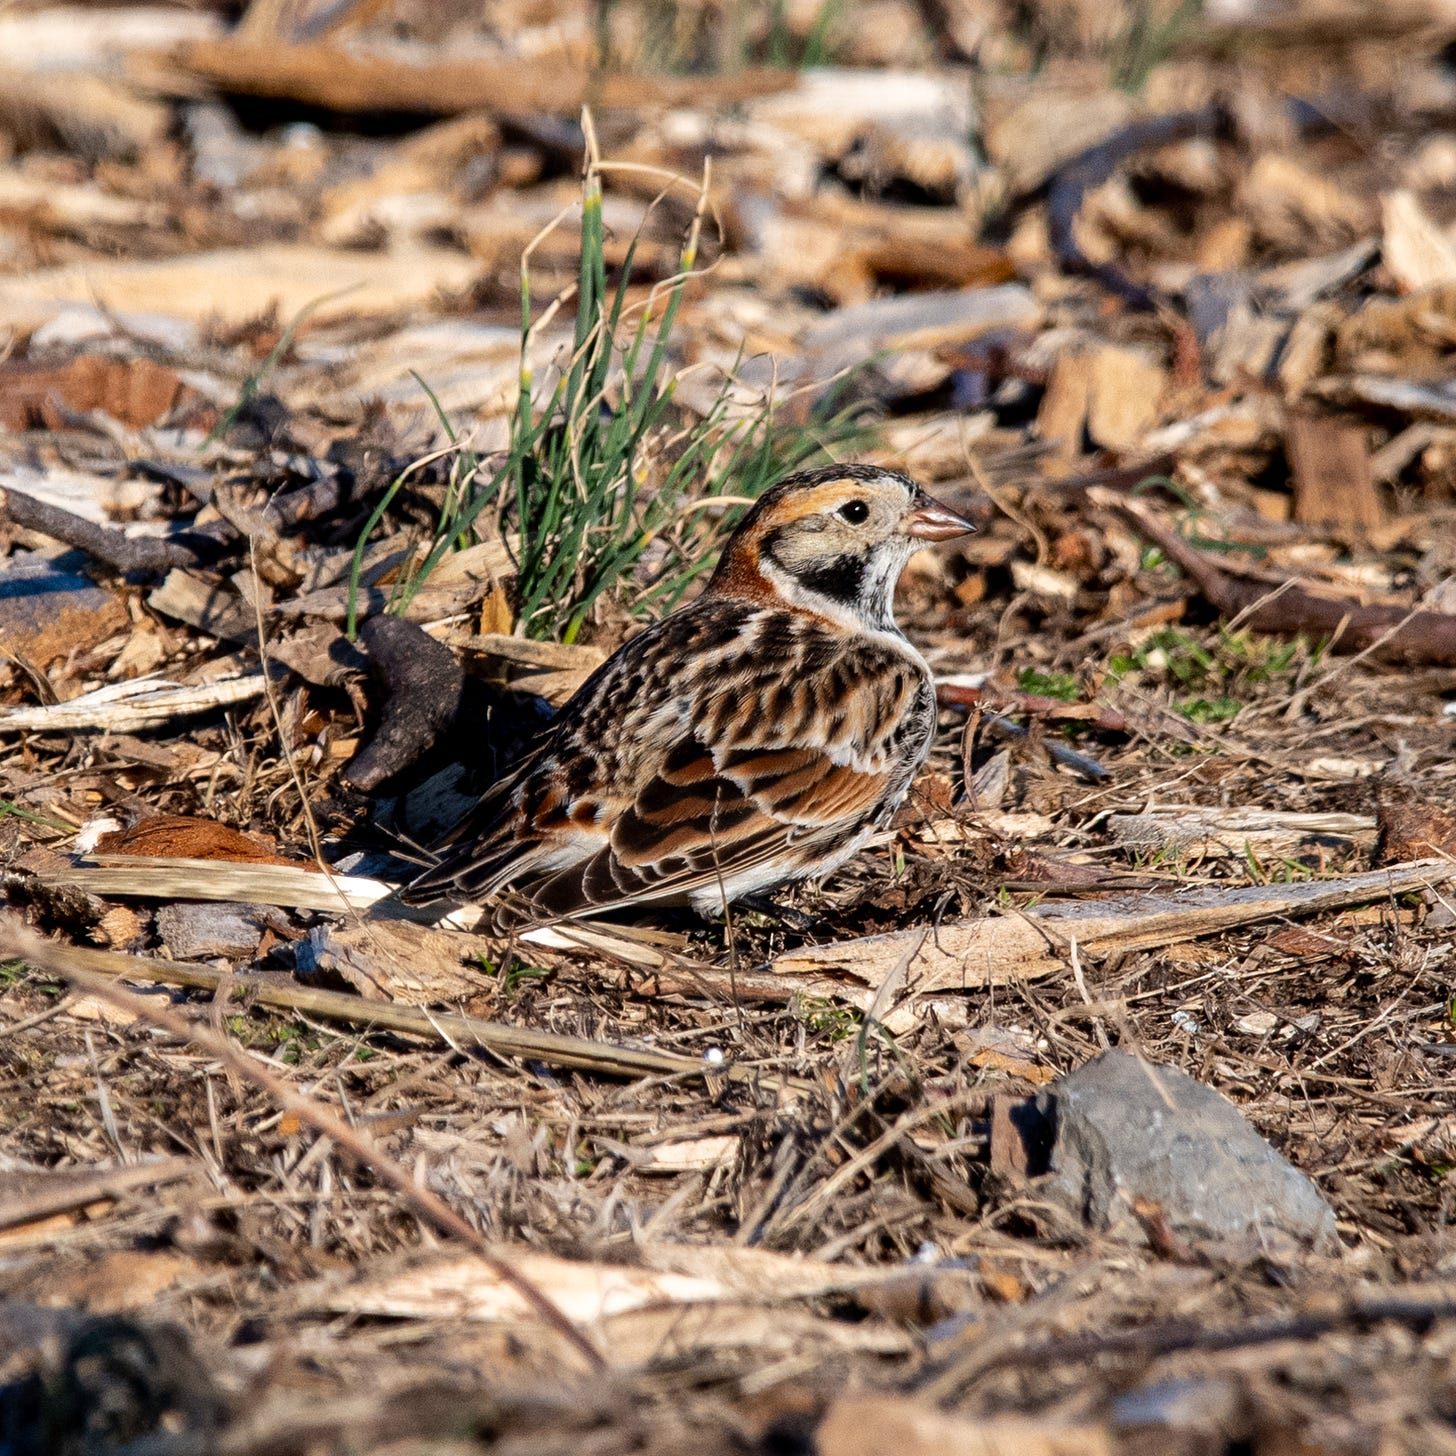 A Lapland longspur (yellow supercilium, gray lore and auricular, rufous nape), seated among leaf and bark debris